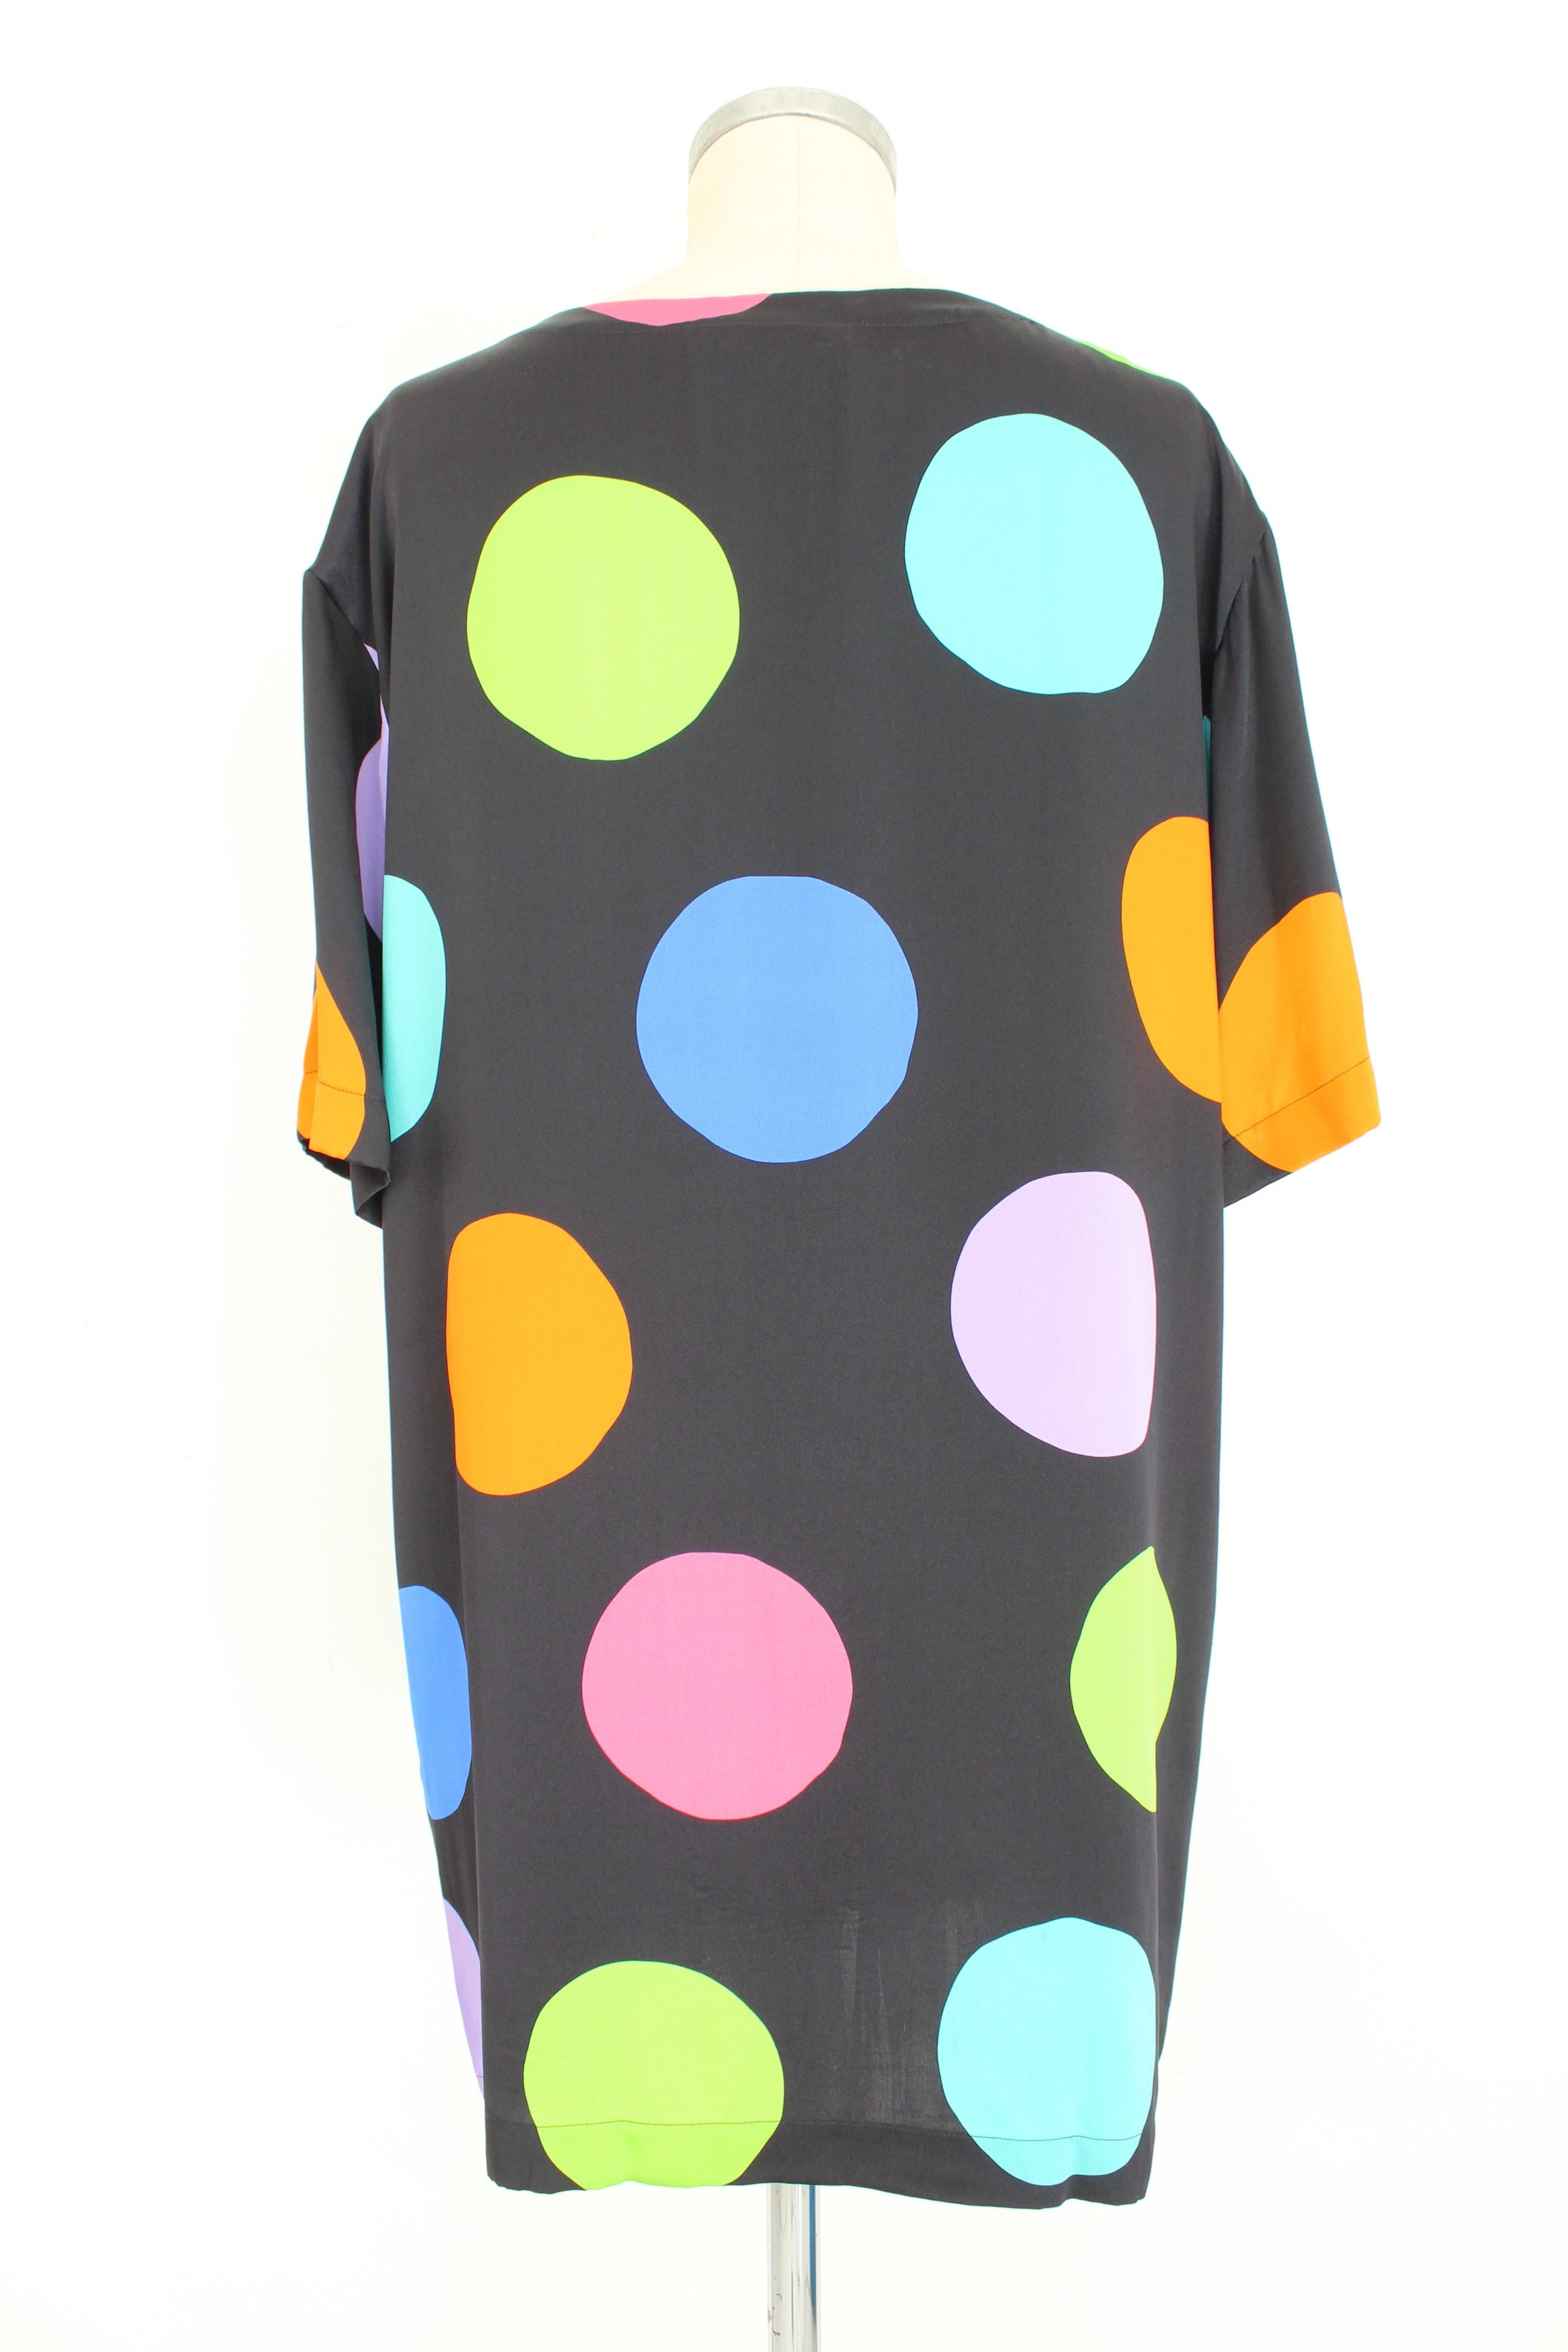 Moschino Couture 2000s vintage woman dress. Sack model dress, knee length. Black color with colored polka dots. 100% silk fabric. Made in Italy.

Condition: Excellent

Item used few times, it remains in its excellent condition. There are no visible